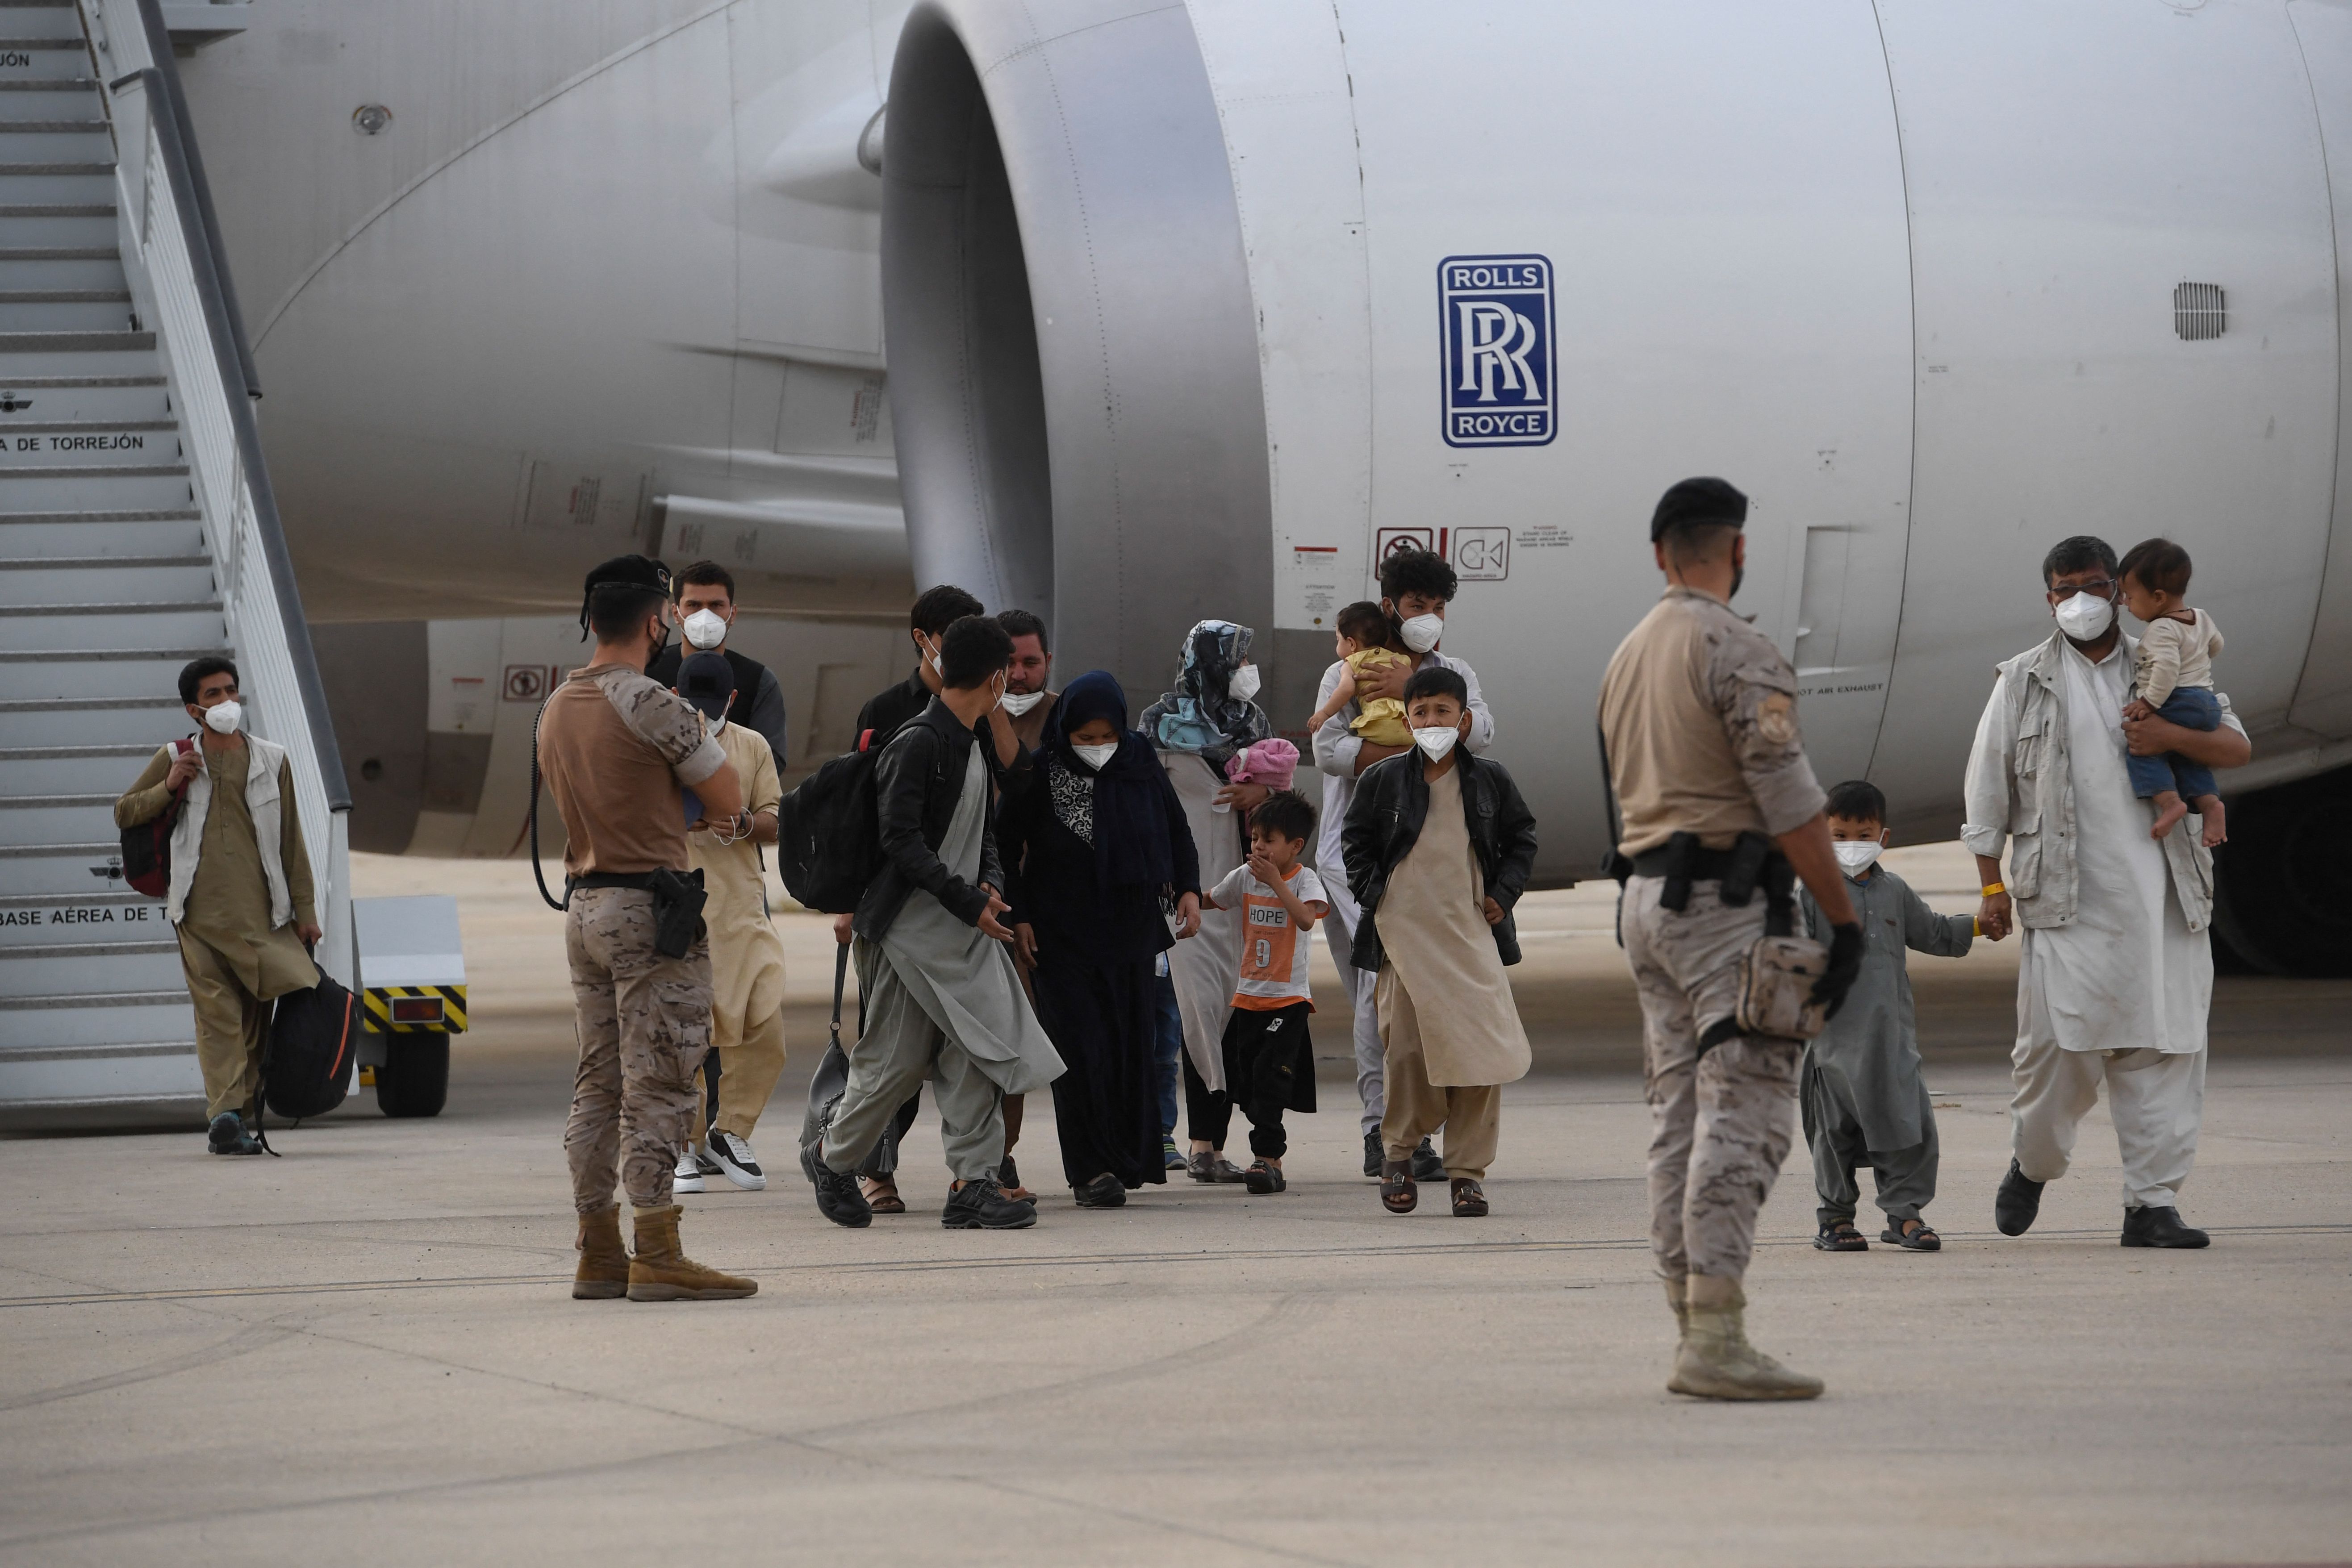  Refugees disembark from an evacuation flight after being airlifted from Kabul, at the Torrejon de Ardoz air base, 30 km from Madrid, on August 24